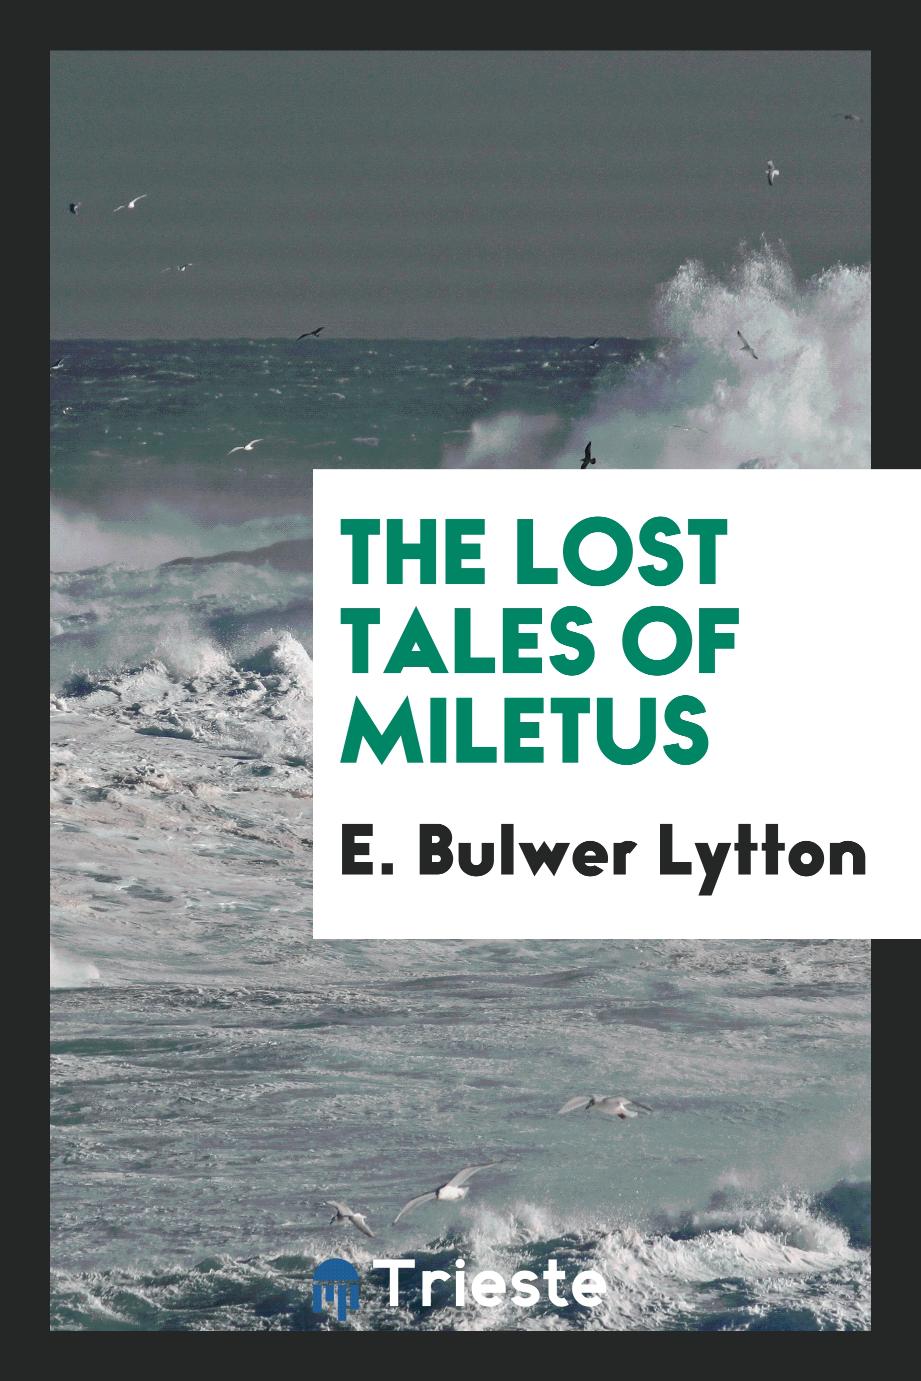 The lost tales of Miletus